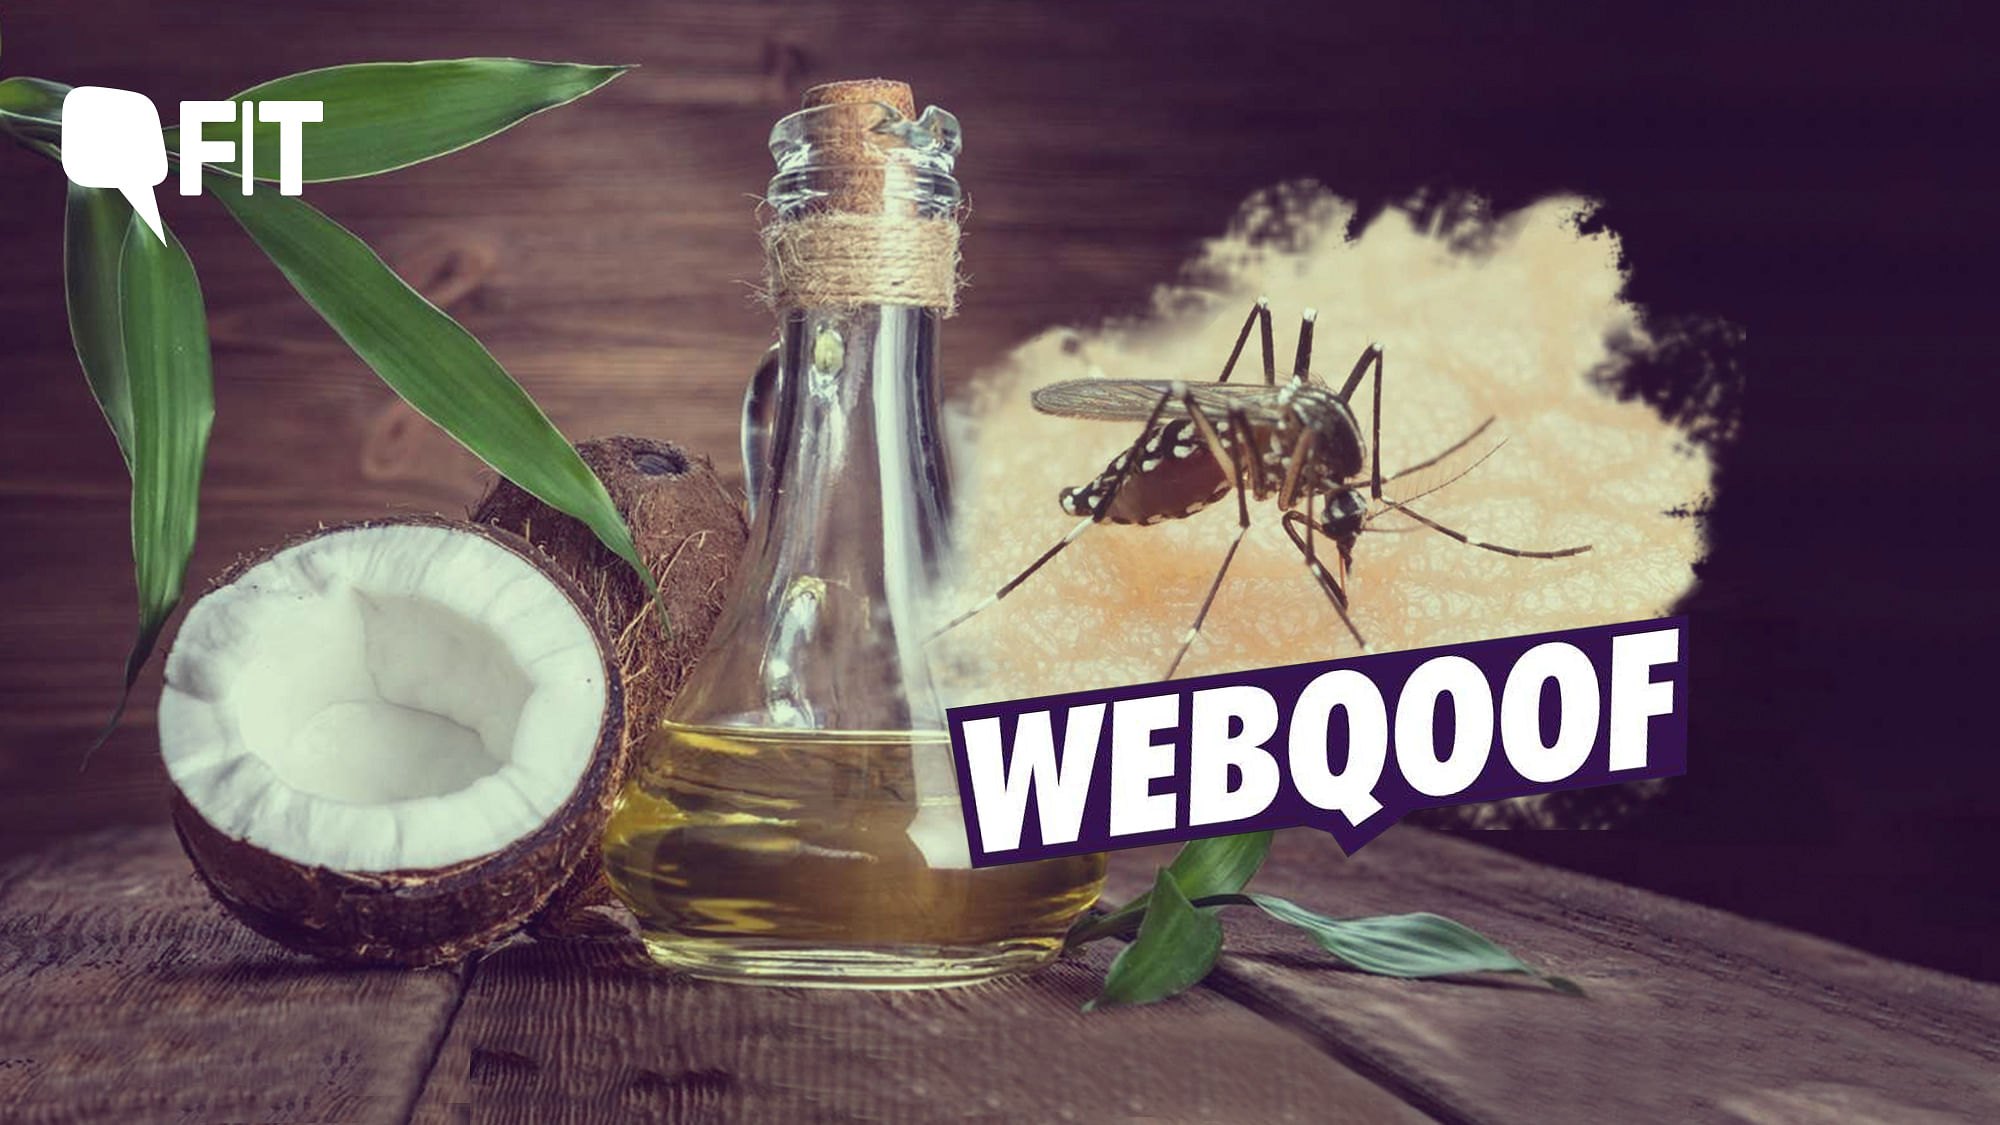 Coconut oil is hailed as a superfood but can it cure dengue?&nbsp;